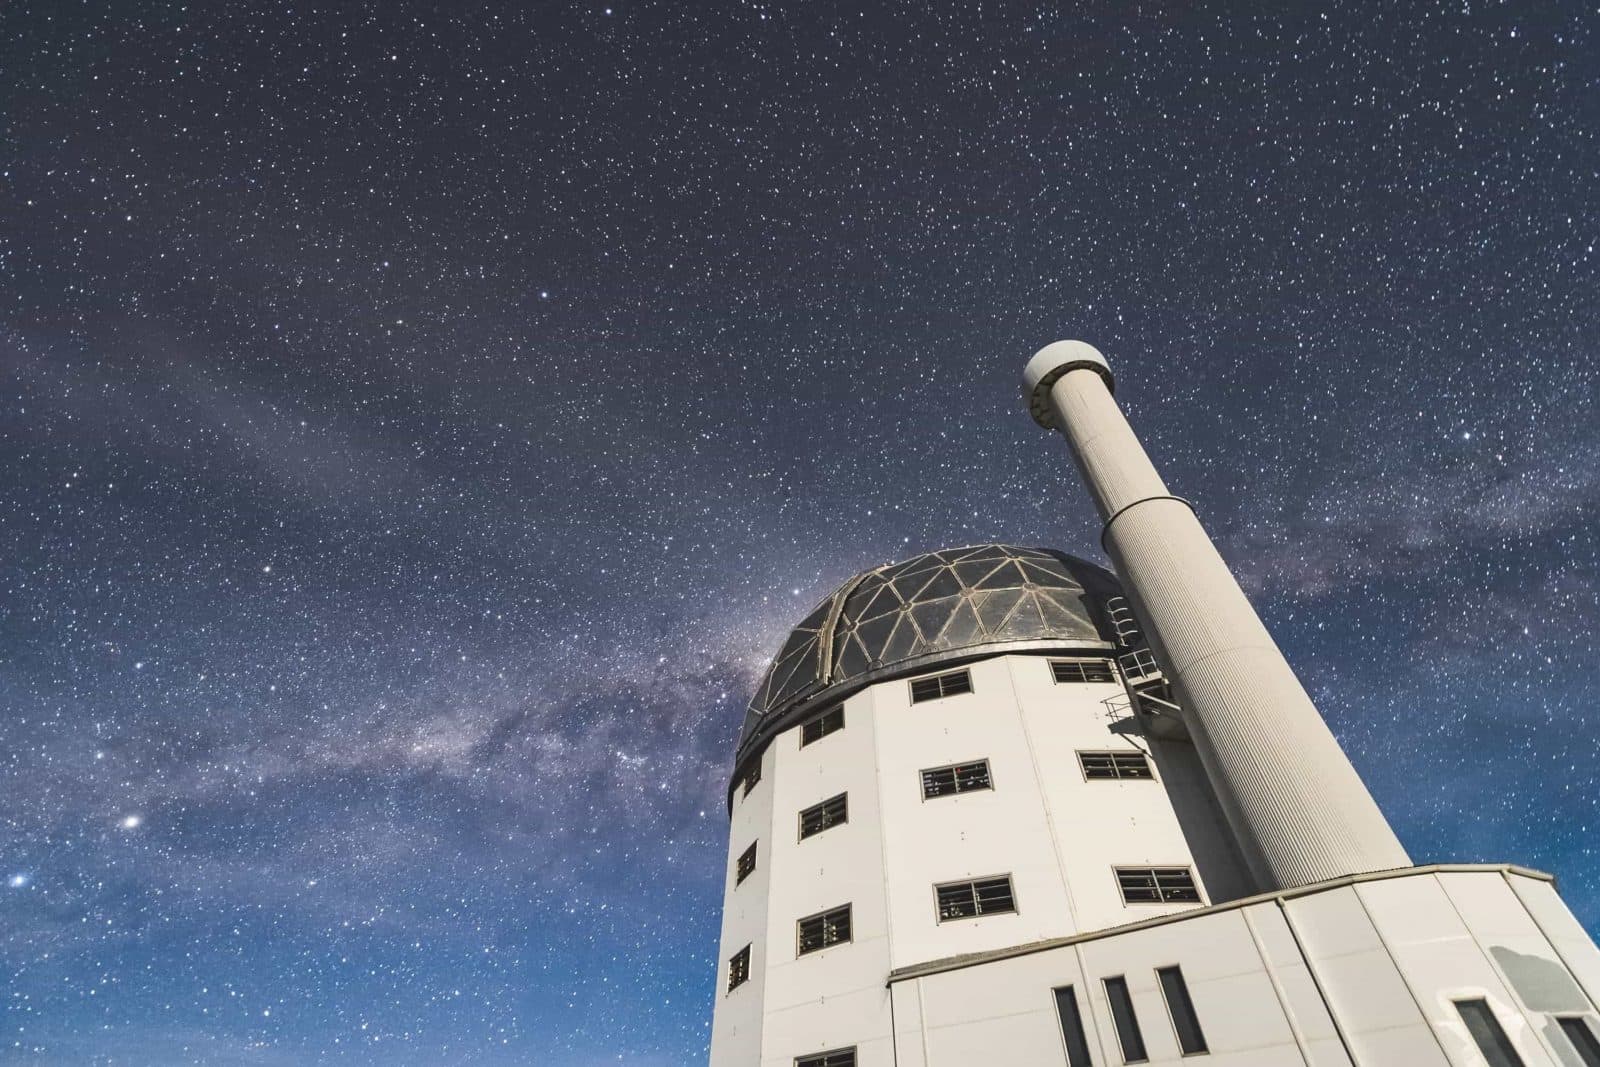 Southern Africa Large Telescope under a starry sky with a visible Milky Way